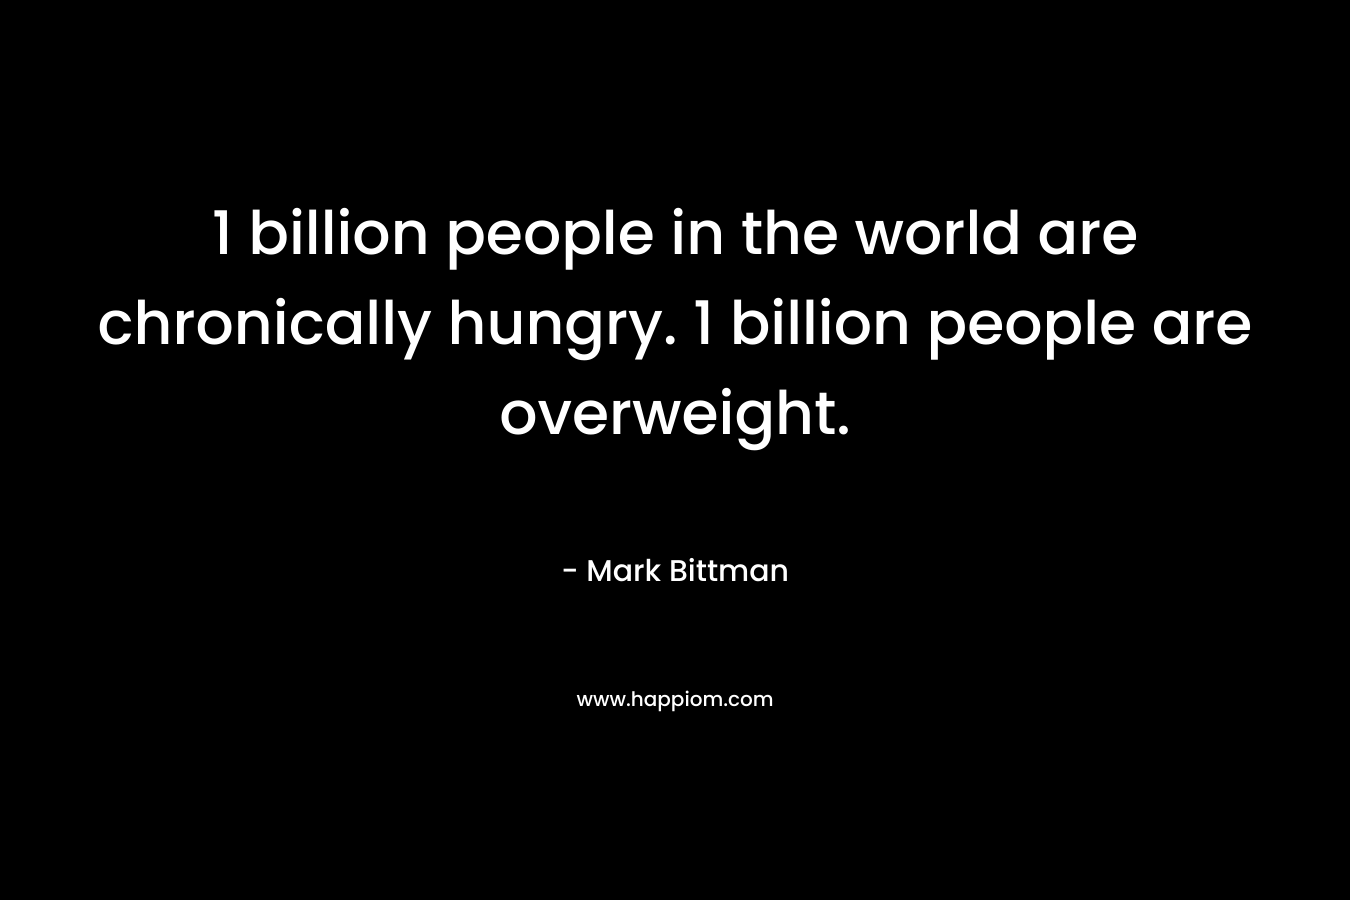 1 billion people in the world are chronically hungry. 1 billion people are overweight.